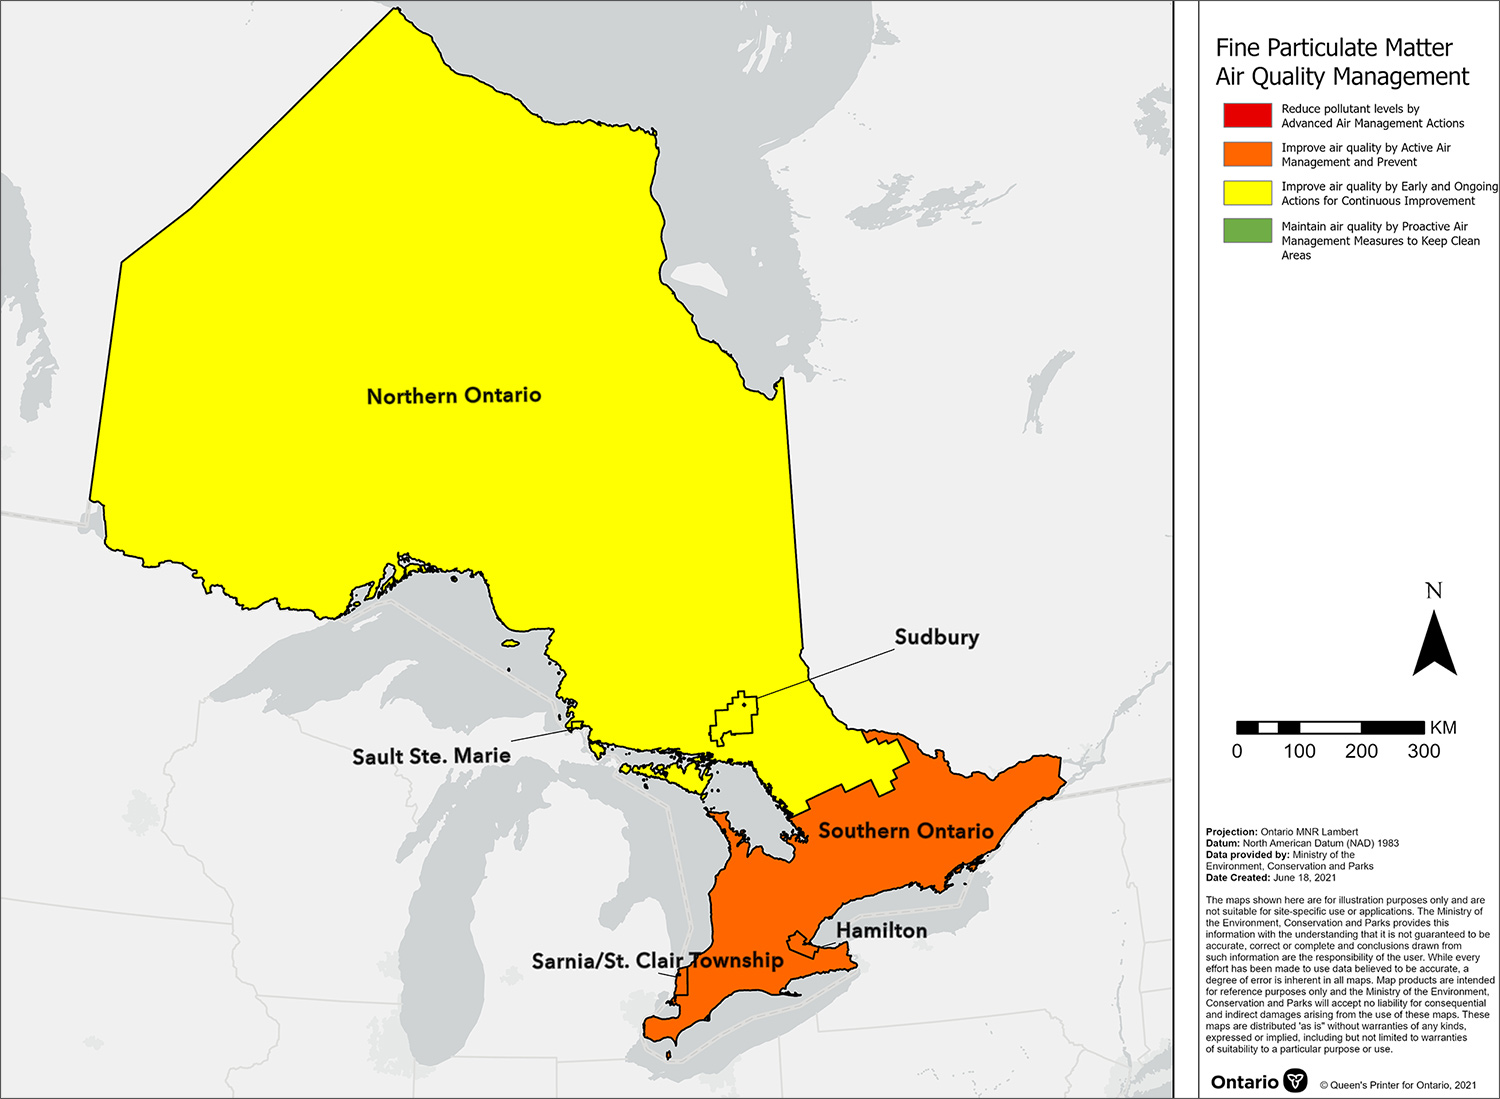 Map showing the fine particulate matter Canadian Ambient Air Quality Standard management levels for air zones across Ontario